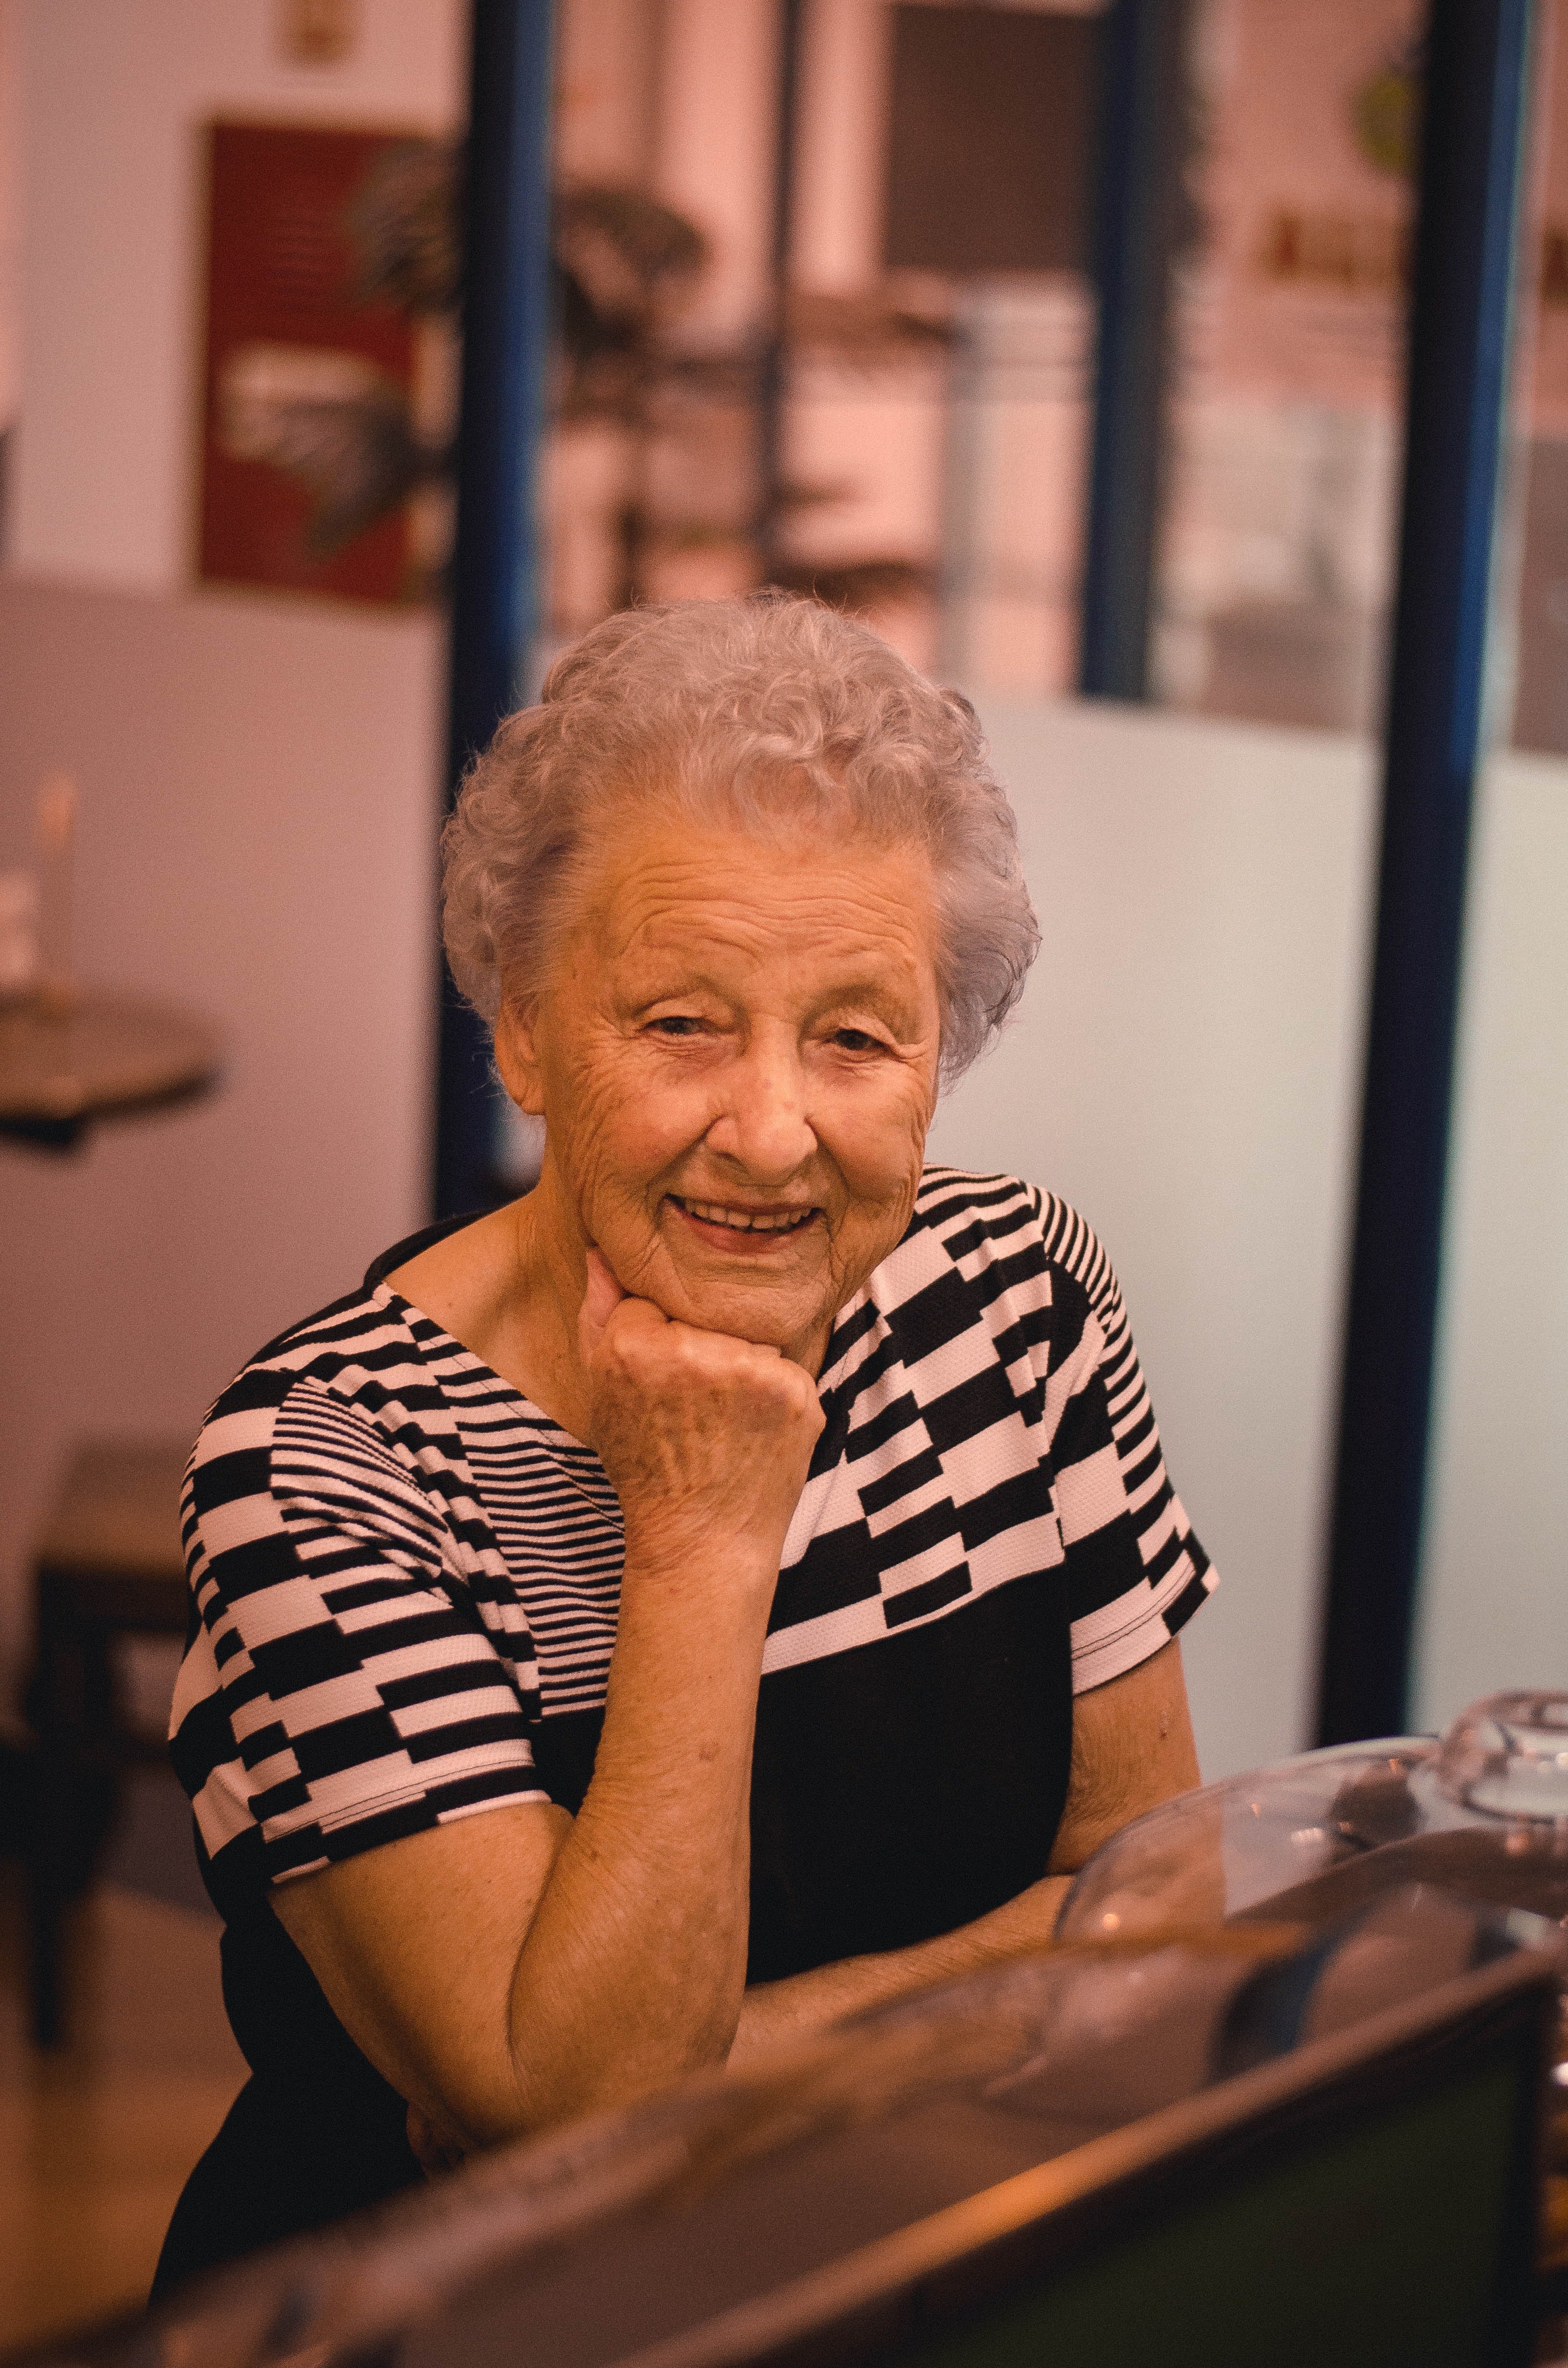 Photo of a smiling old woman | Photo: Pexels